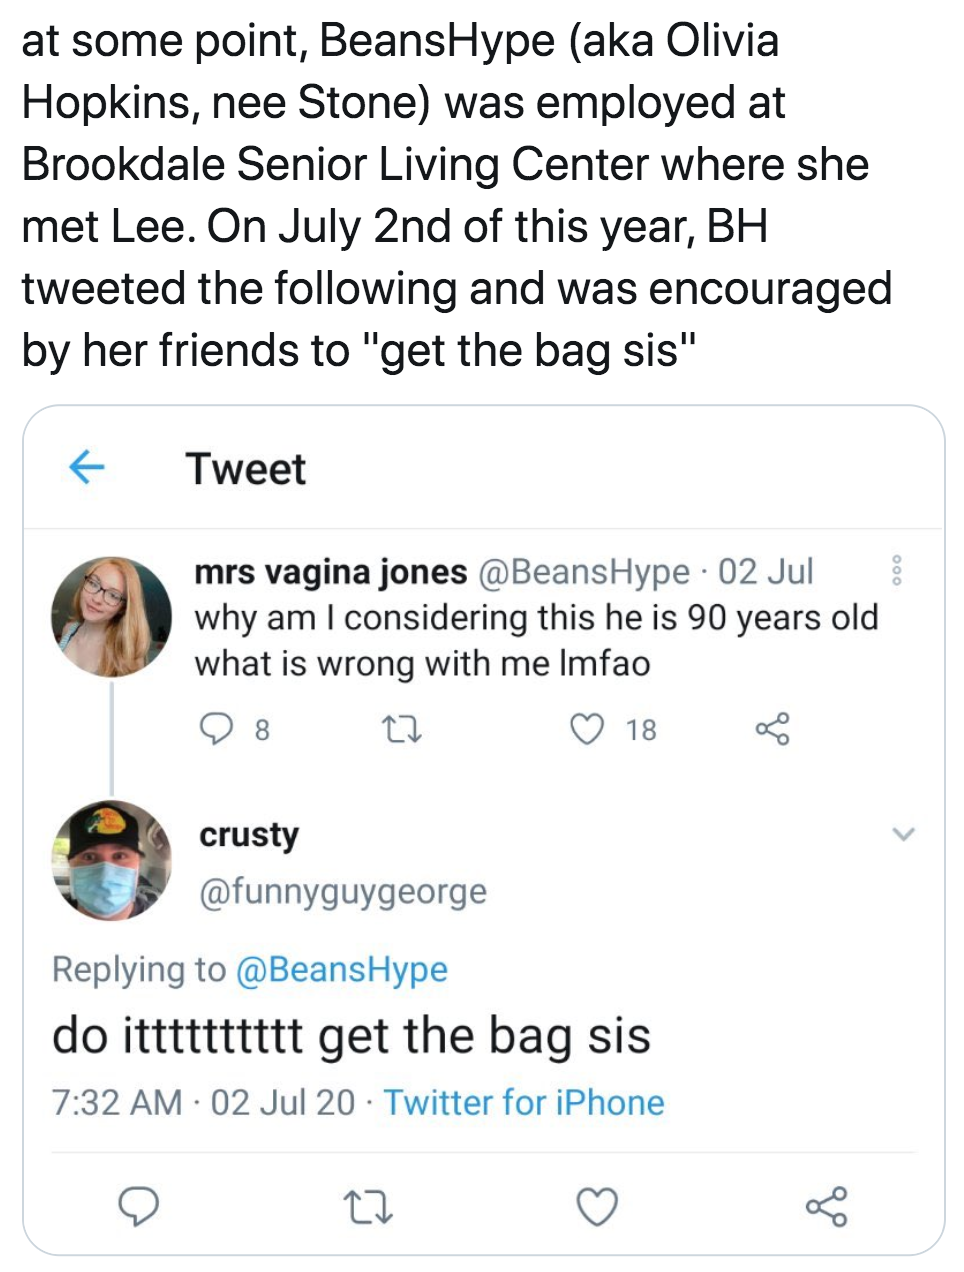 document - at some point, Beans Hype aka Olivia Hopkins, nee Stone was employed at Brookdale Senior Living Center where she met Lee. On July 2nd of this year, Bh tweeted the ing and was encouraged by her friends to "get the bag sis" Tweet mrs vagina jones